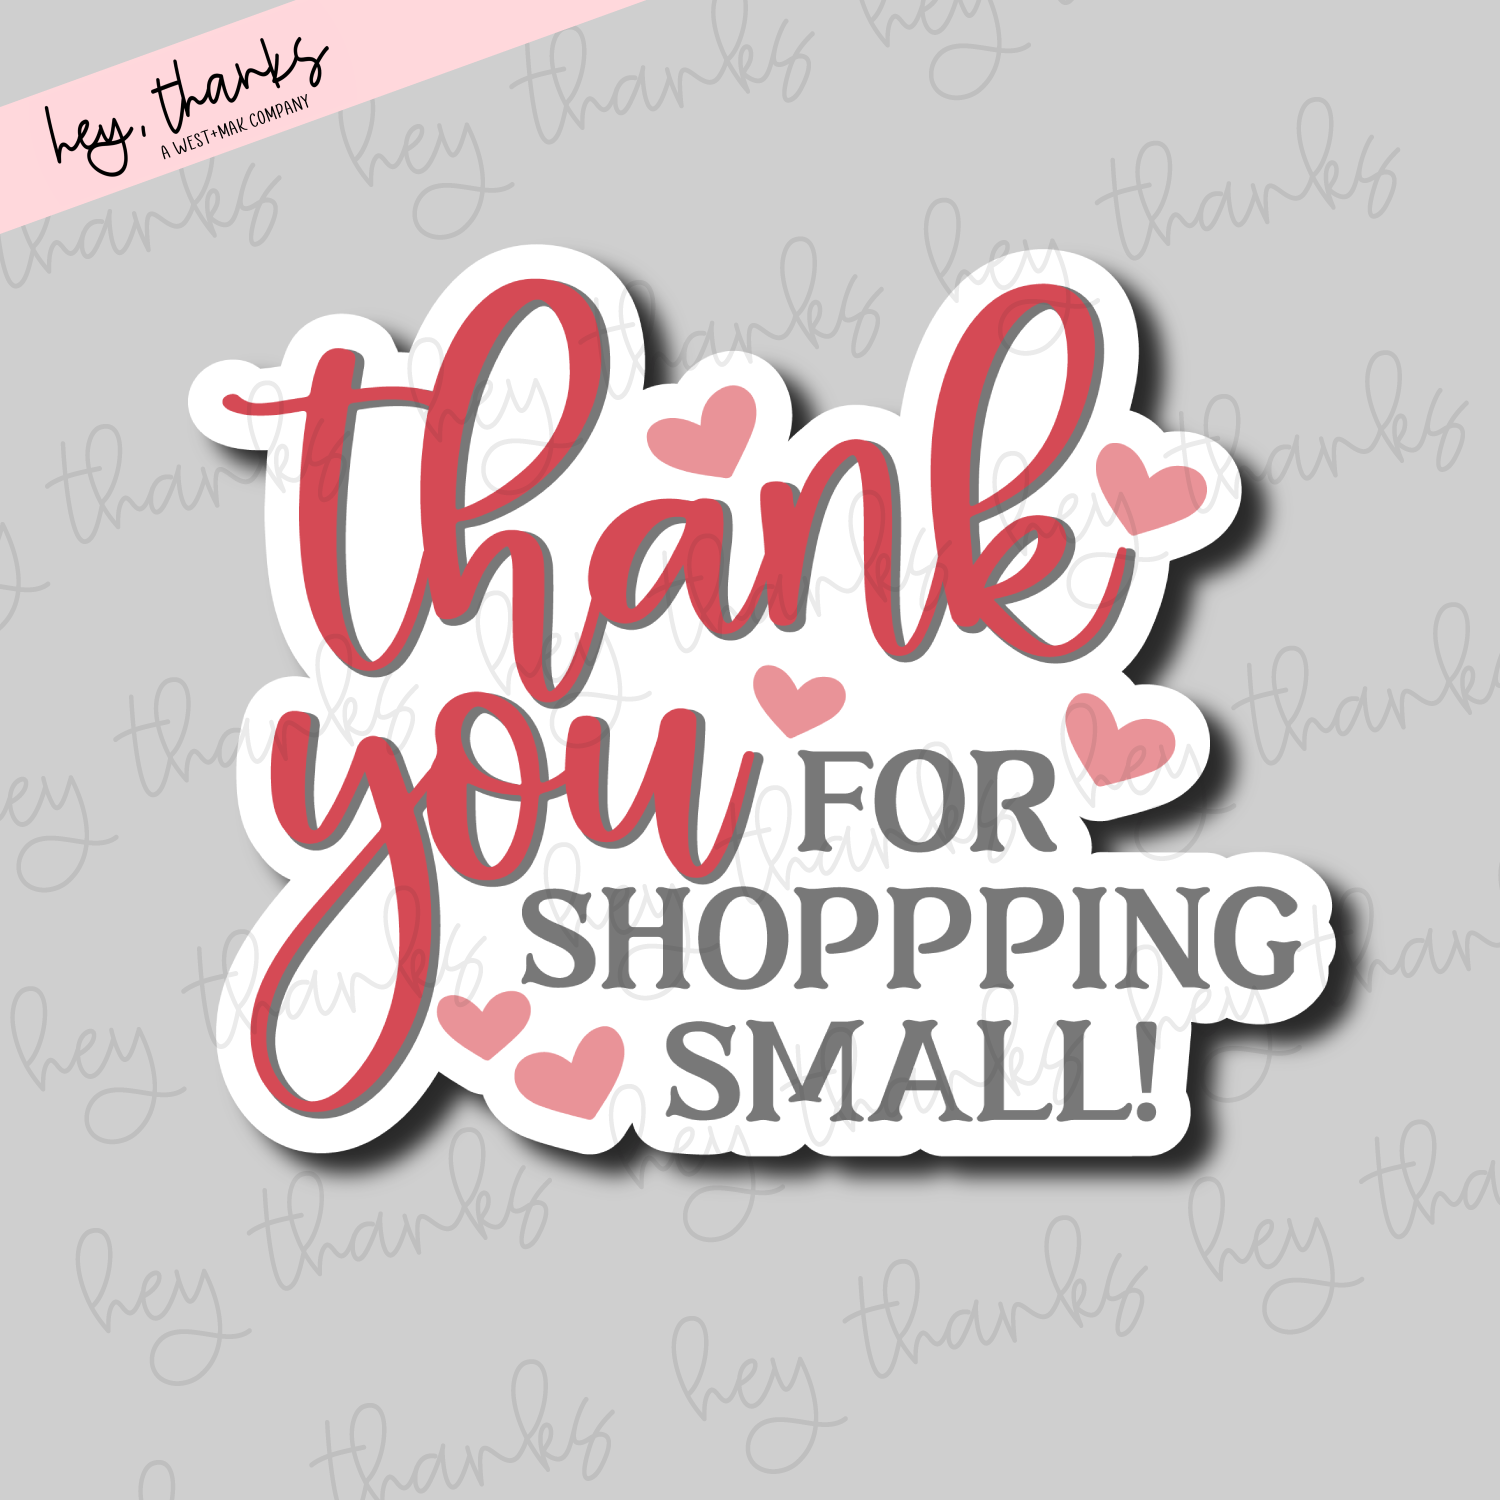 Thank You for Shopping Small